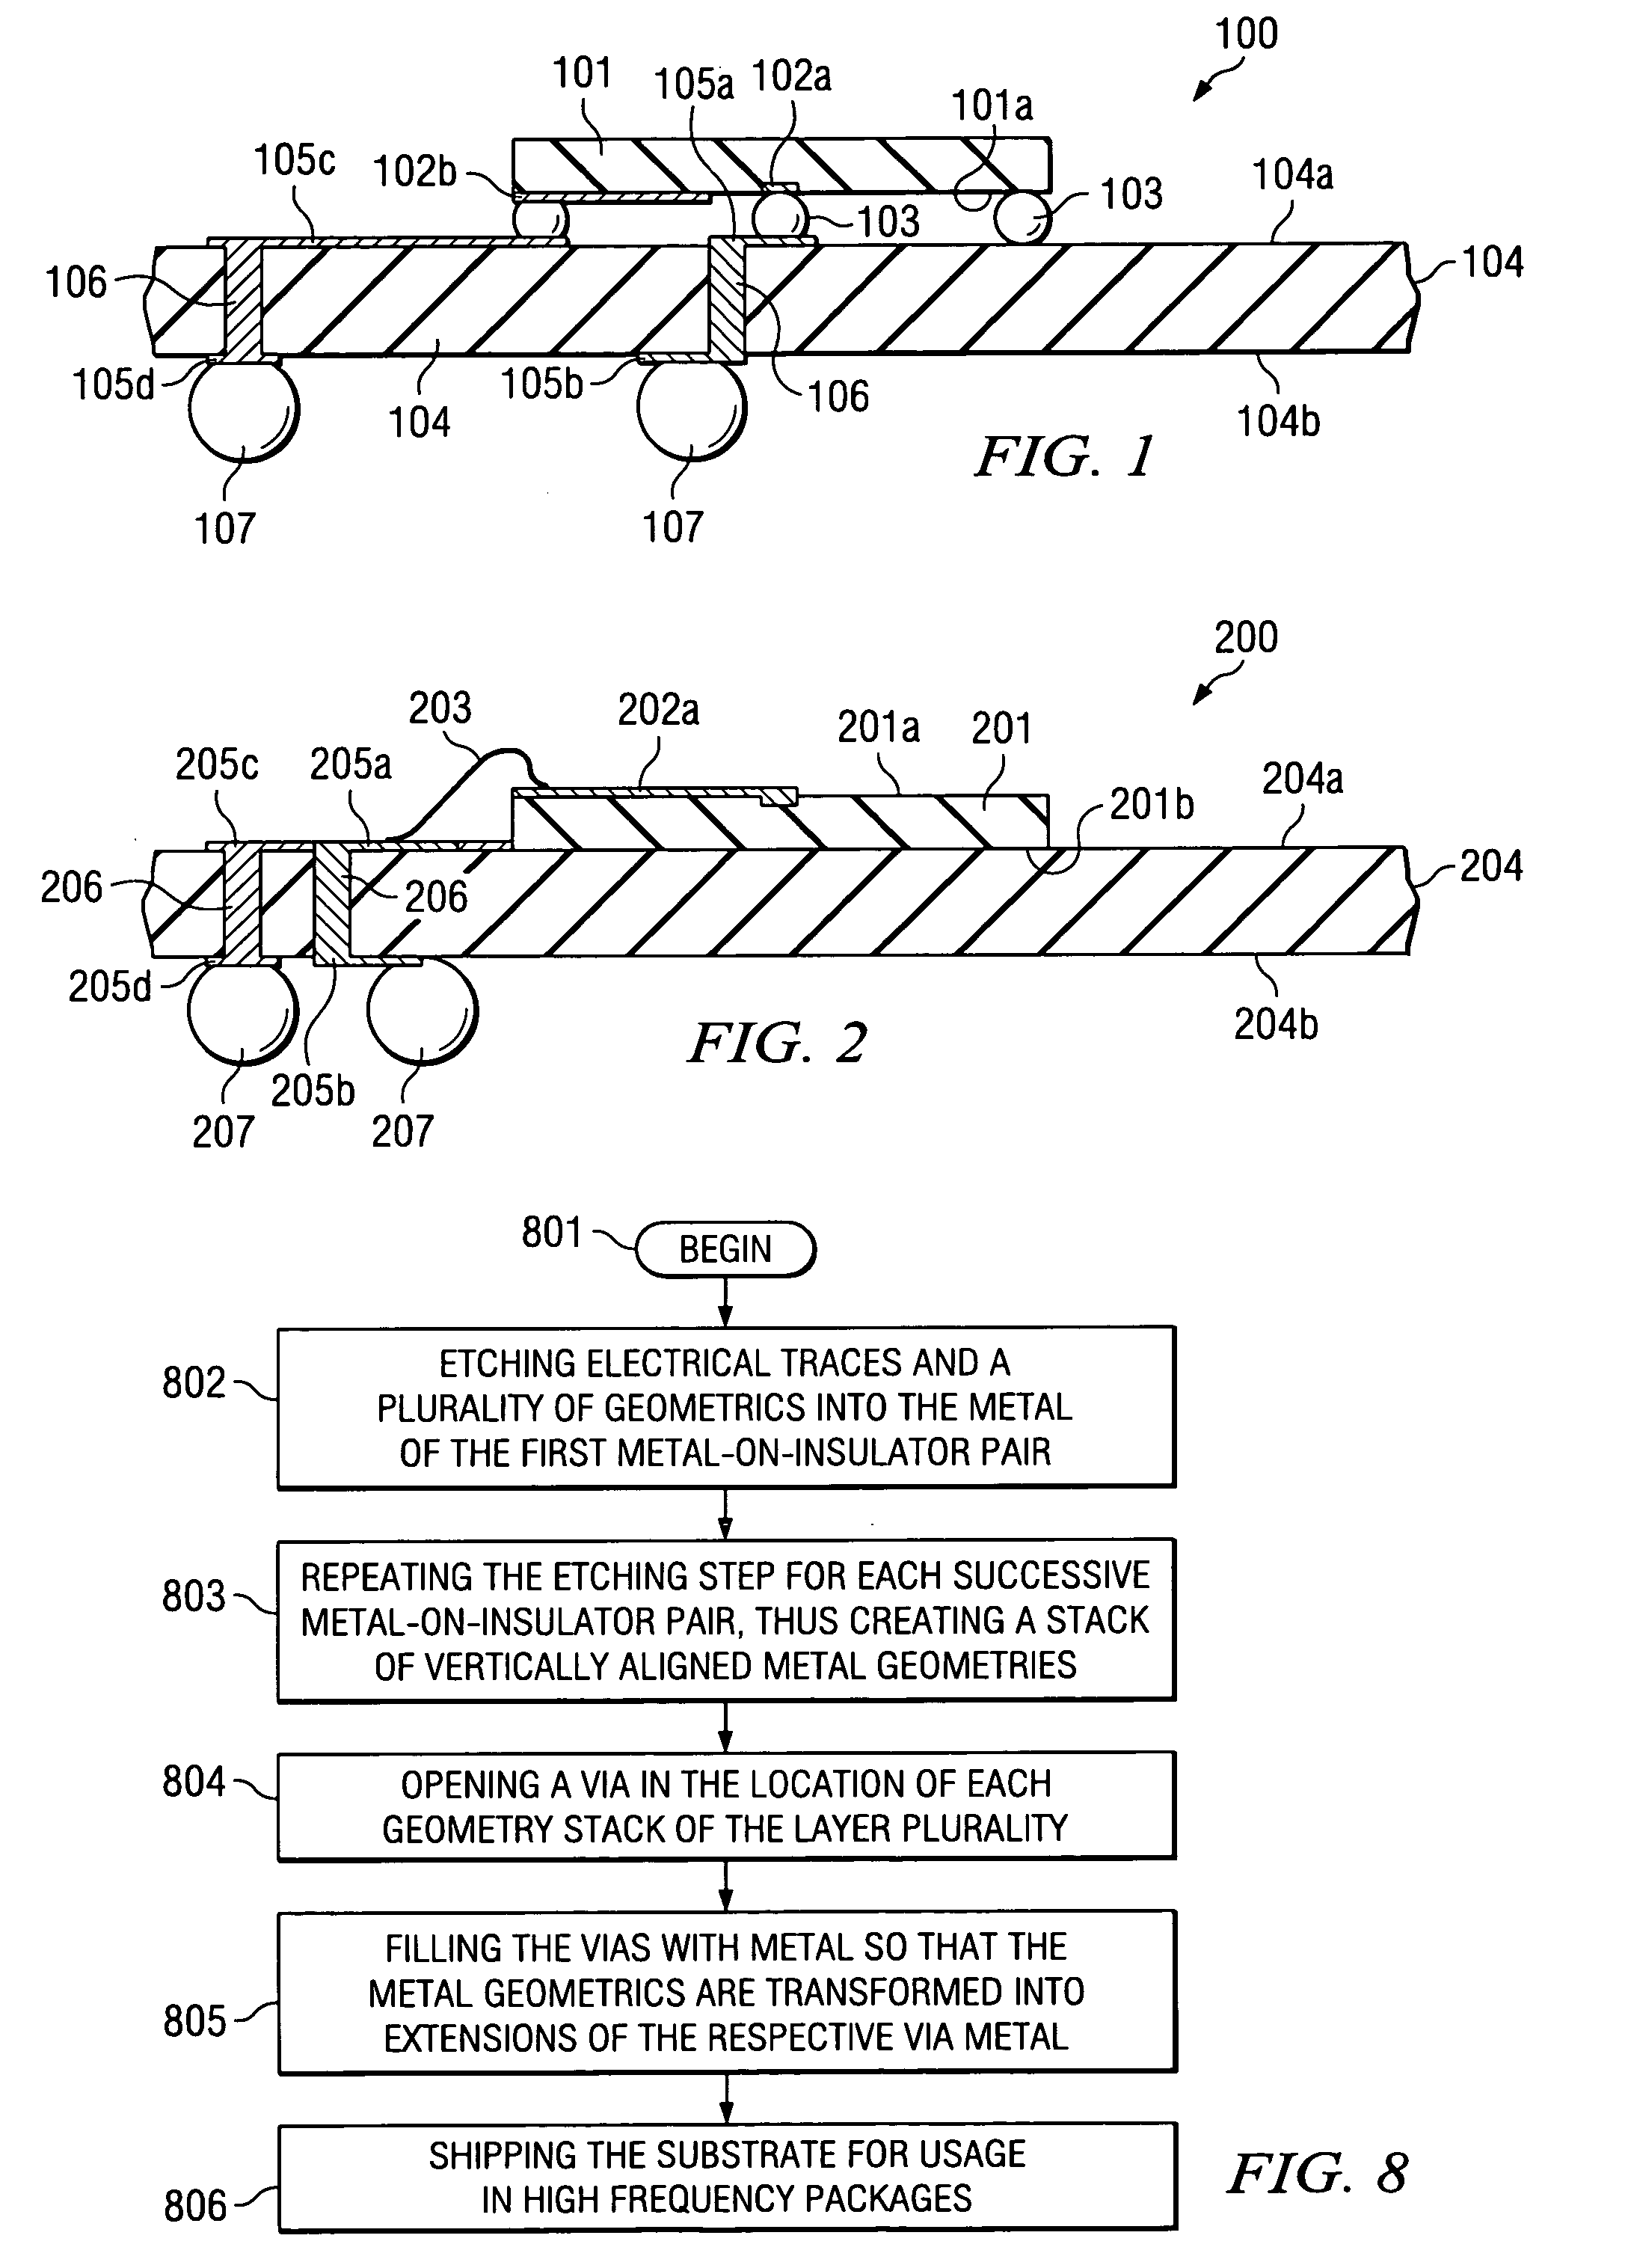 Via structure of packages for high frequency semiconductor devices